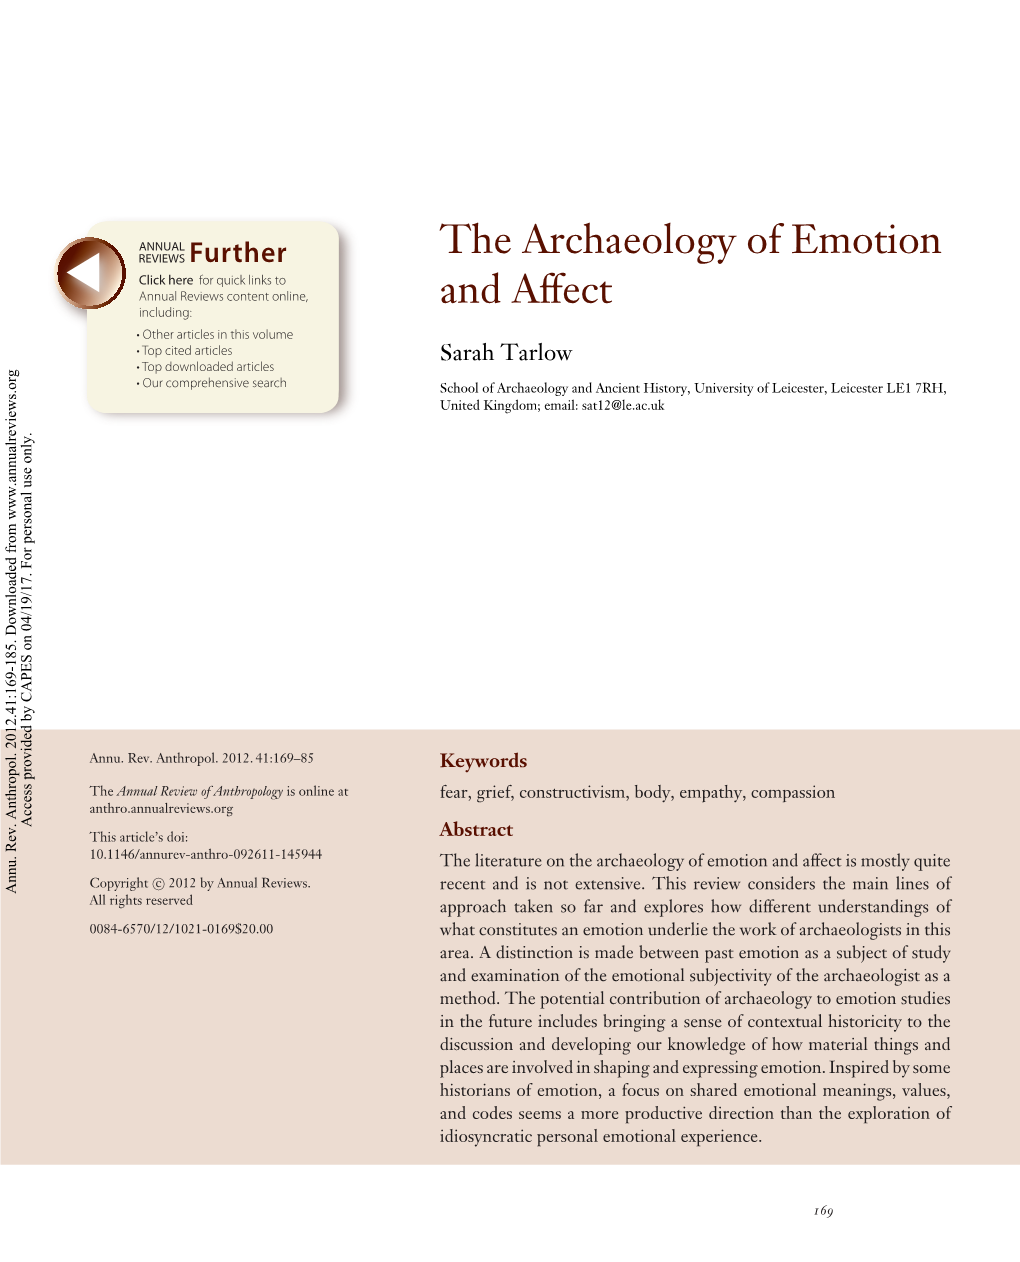 The Archaeology of Emotion and Affect